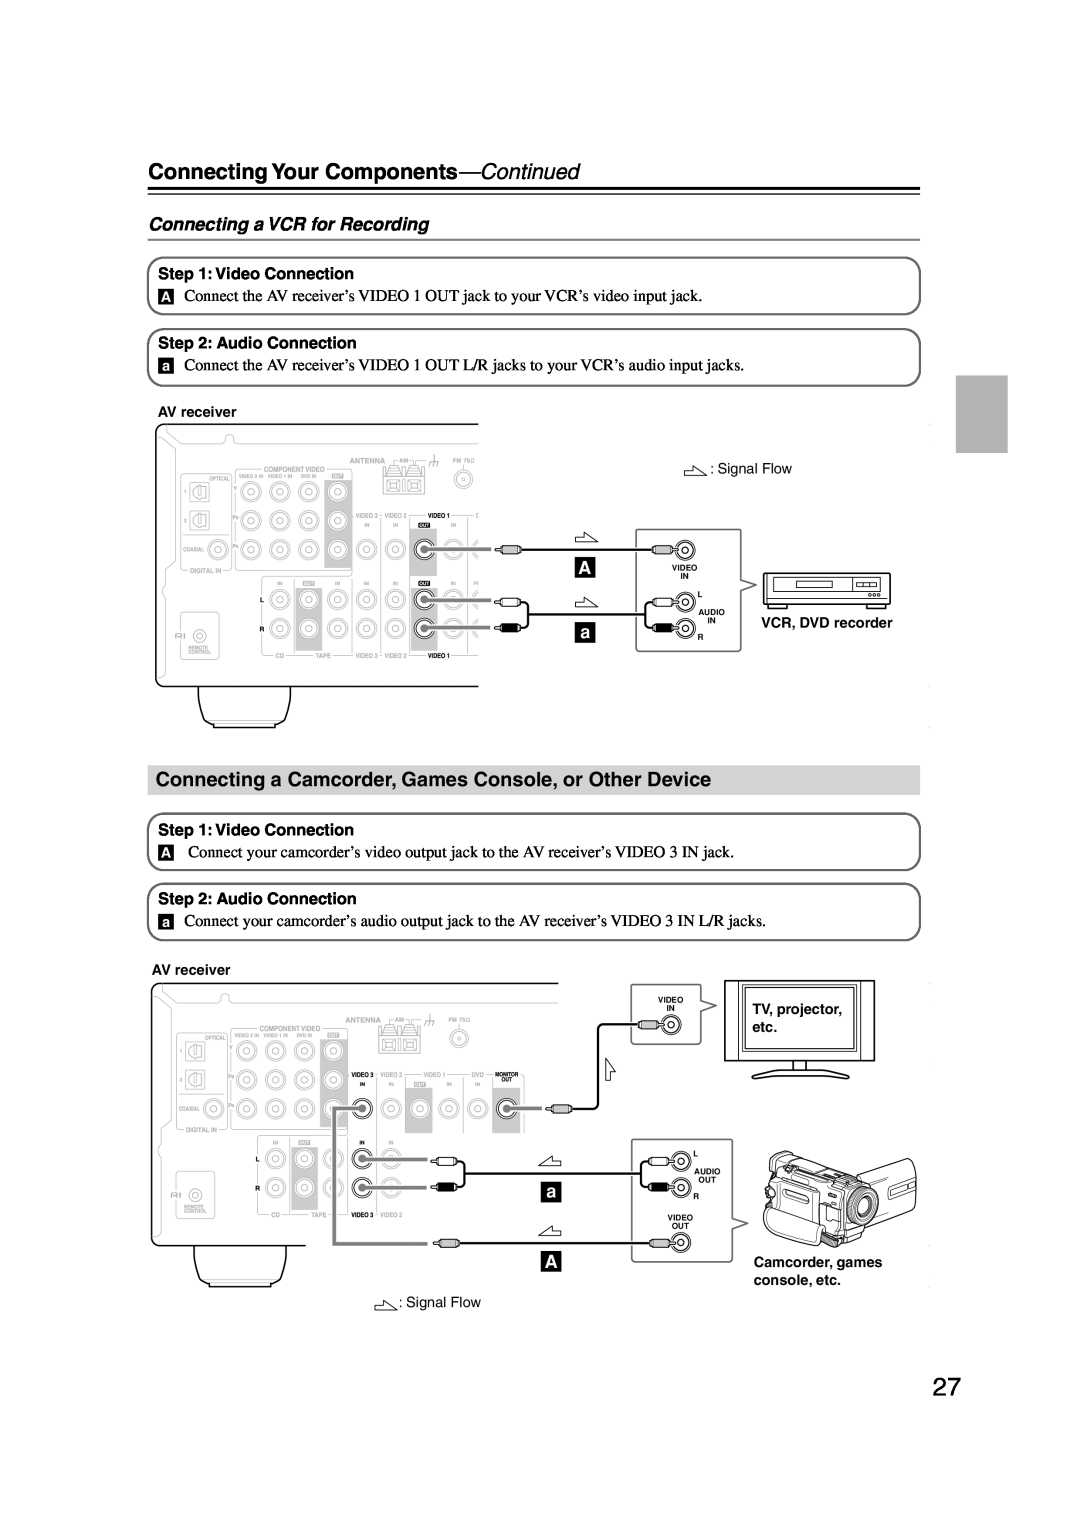 Onkyo TX-SR304 instruction manual Connecting a VCR for Recording, Connecting Your Components-Continued 